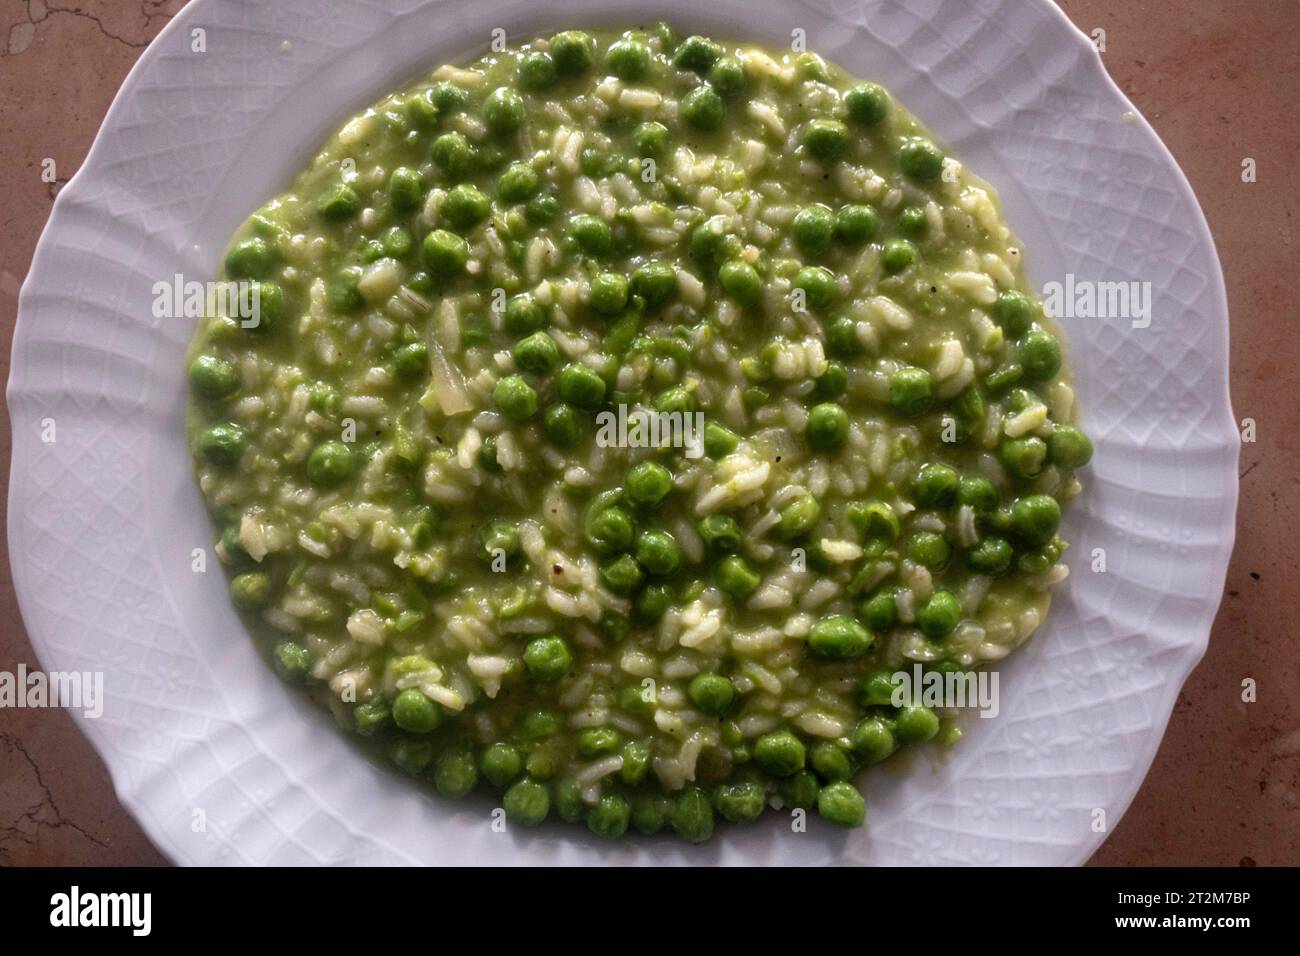 Typical dish of traditional Venetian cuisine rice and peas 'risi e bisi' in Venetian dialect Stock Photo